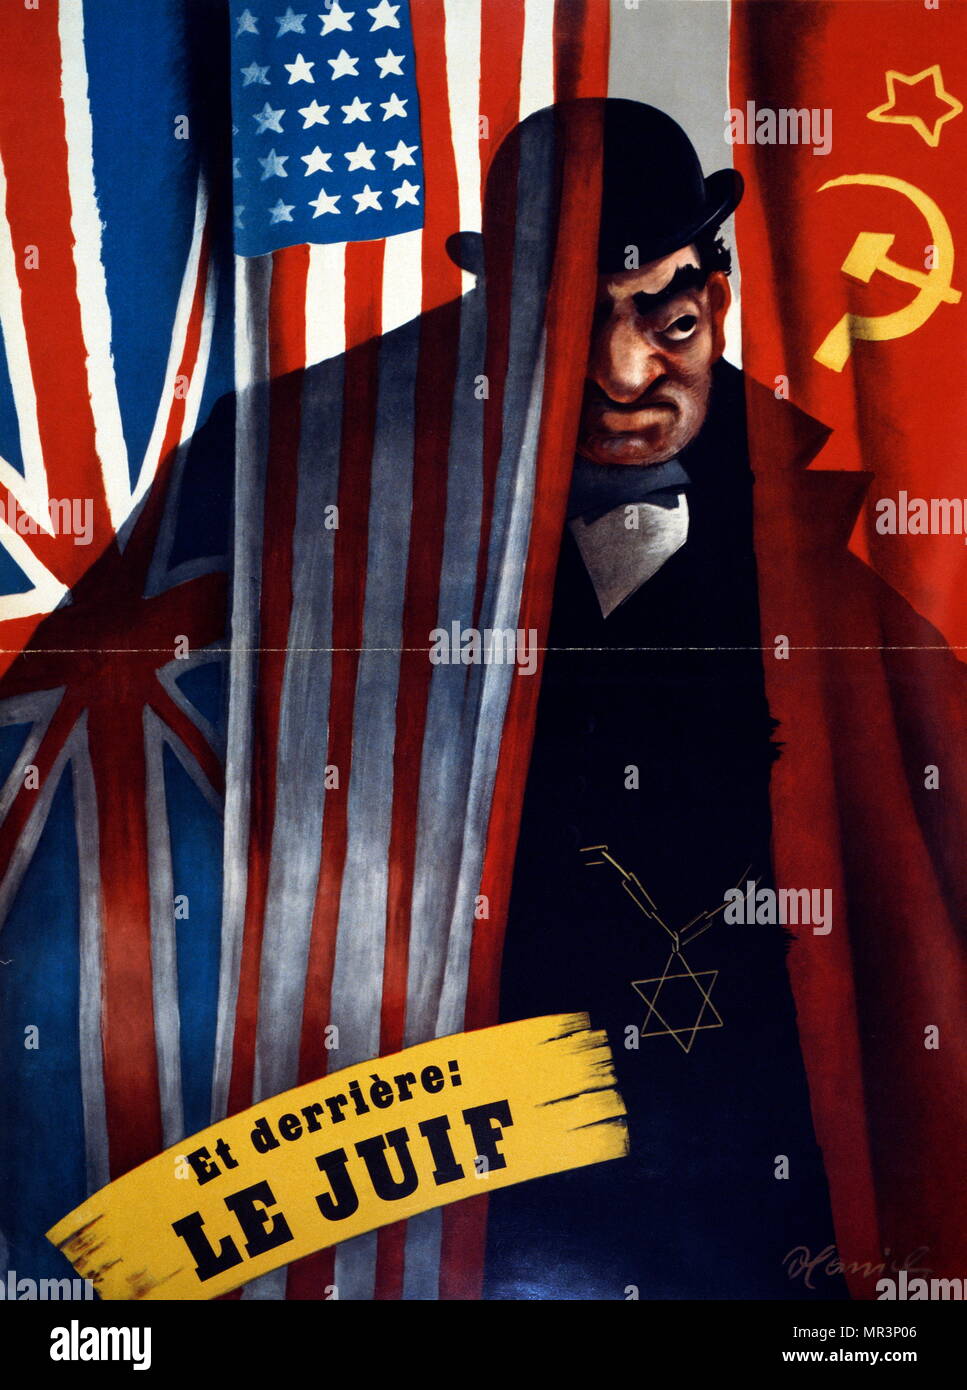 Anti-Semitic poster from Nazi-occupied France during World war two. by Bruno Hanich, artist; 1943. Nazi propagandists often depicted 'the Jew' as a conspirator who plotted to dominate the world, acting in the dark in countries at war with Germany. The caricature represents the 'Jewish financier' manipulating the Allies - Great Britain and the United States Stock Photo